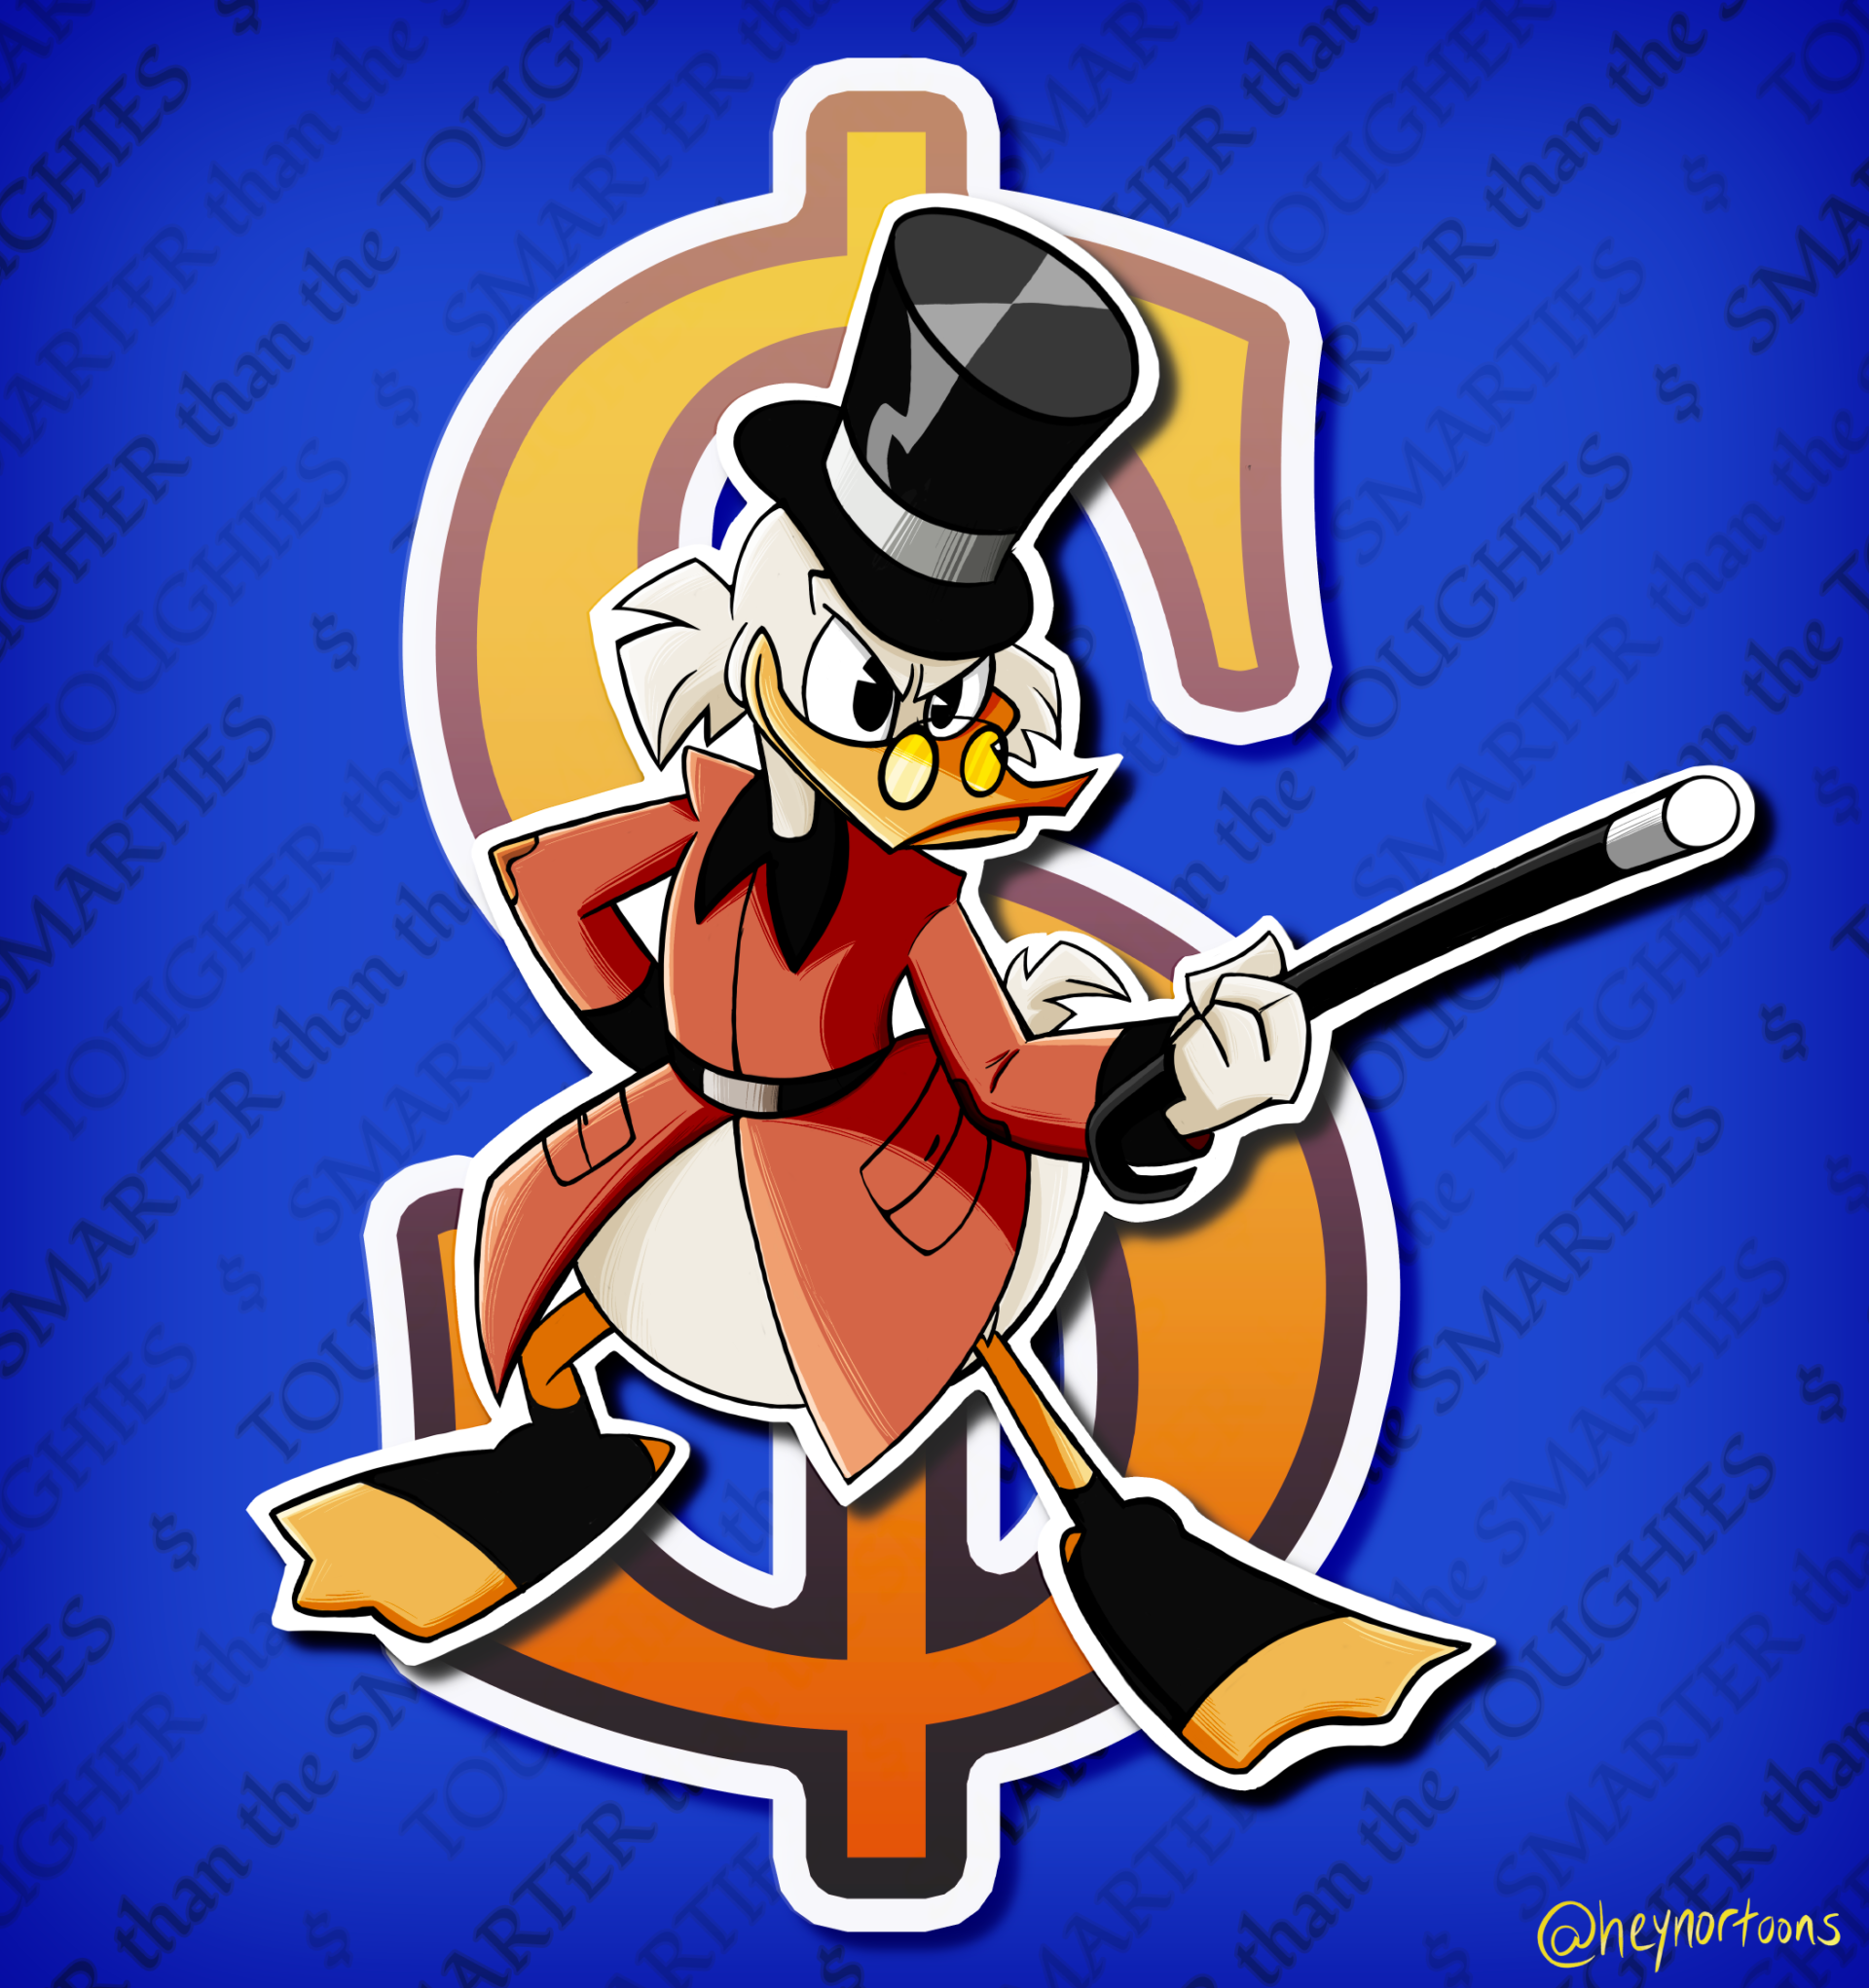 Scrooge McDuck: Tougher than the Toughies, Smarter than the Smarties